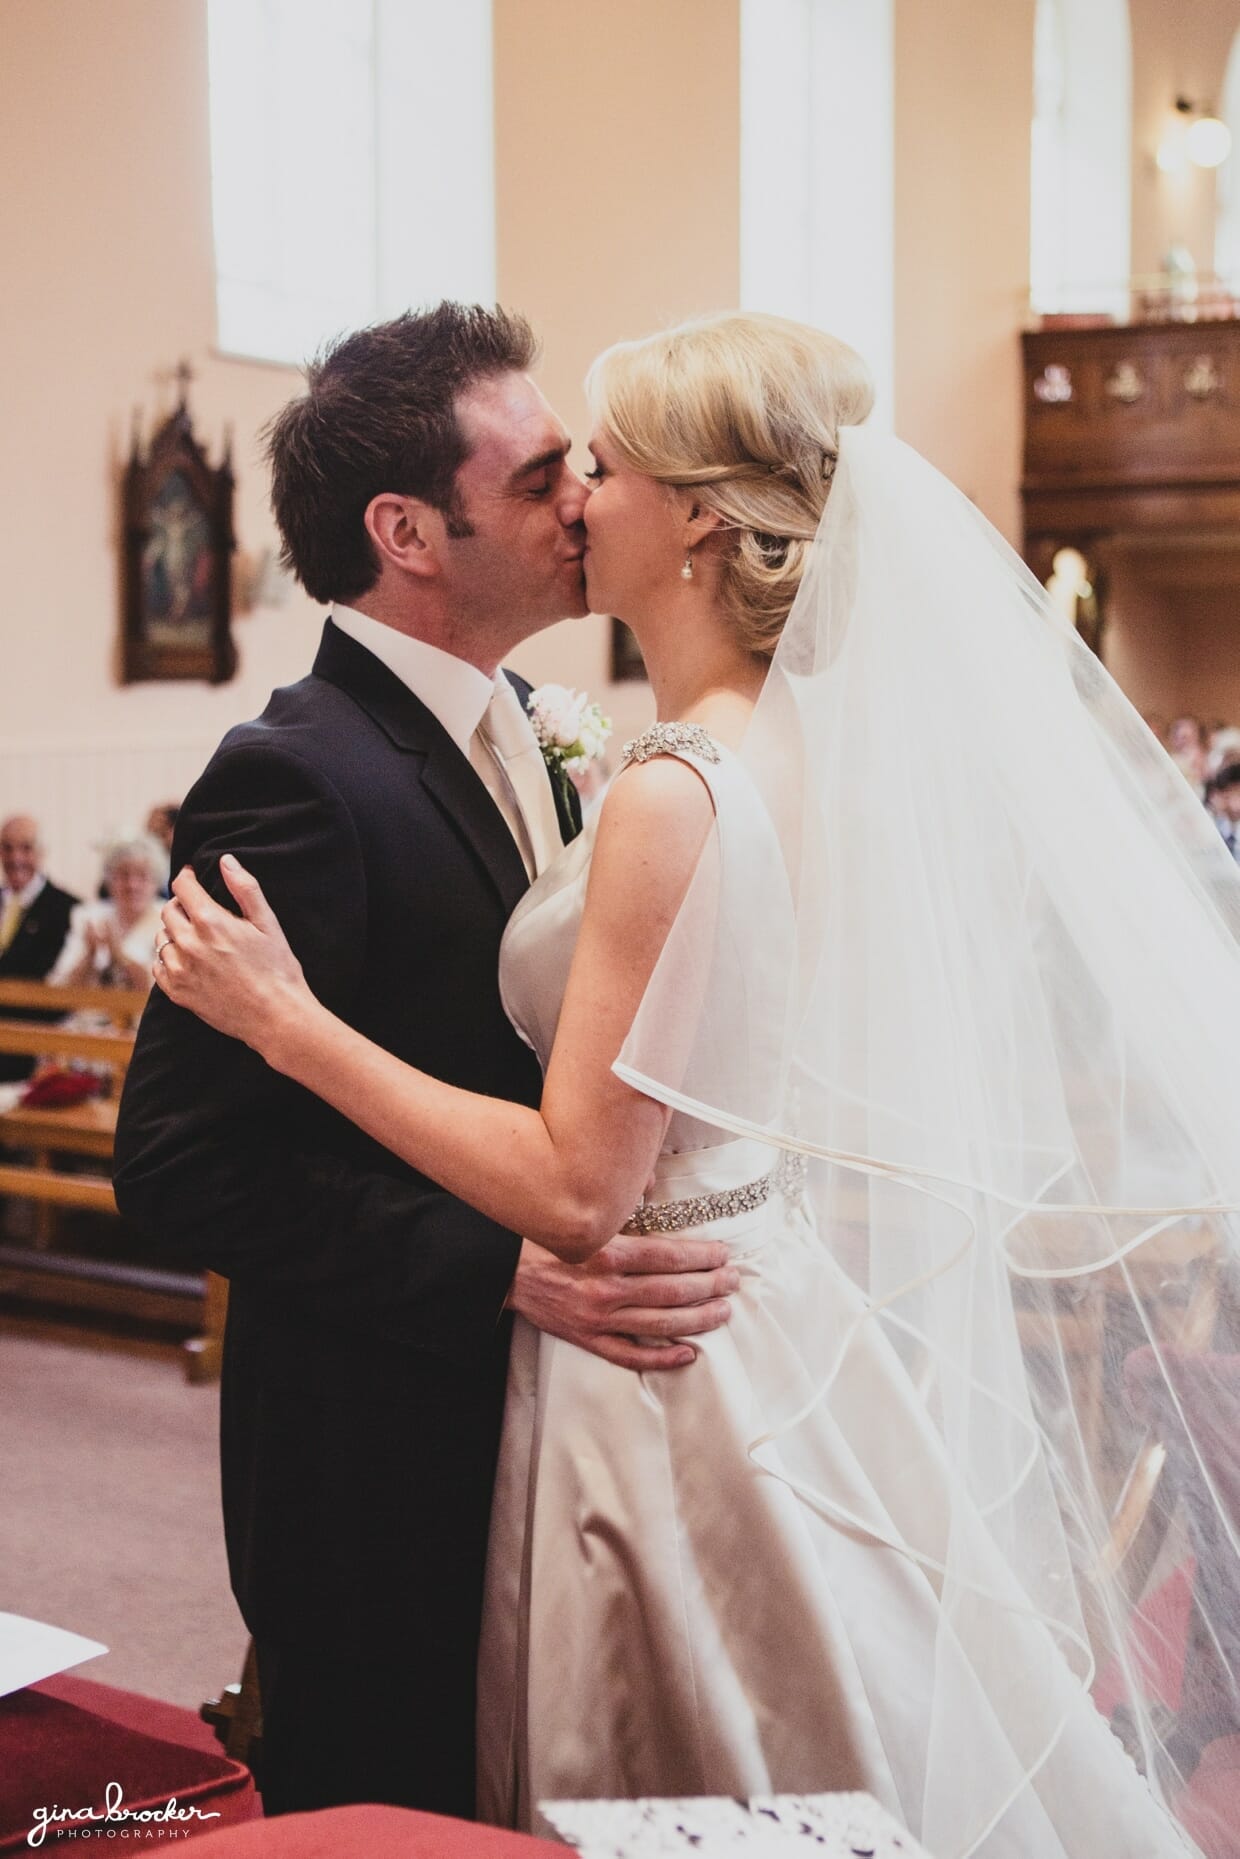 The bride and groom share their first kiss as husband and wife after saying i do at their religious wedding ceremony